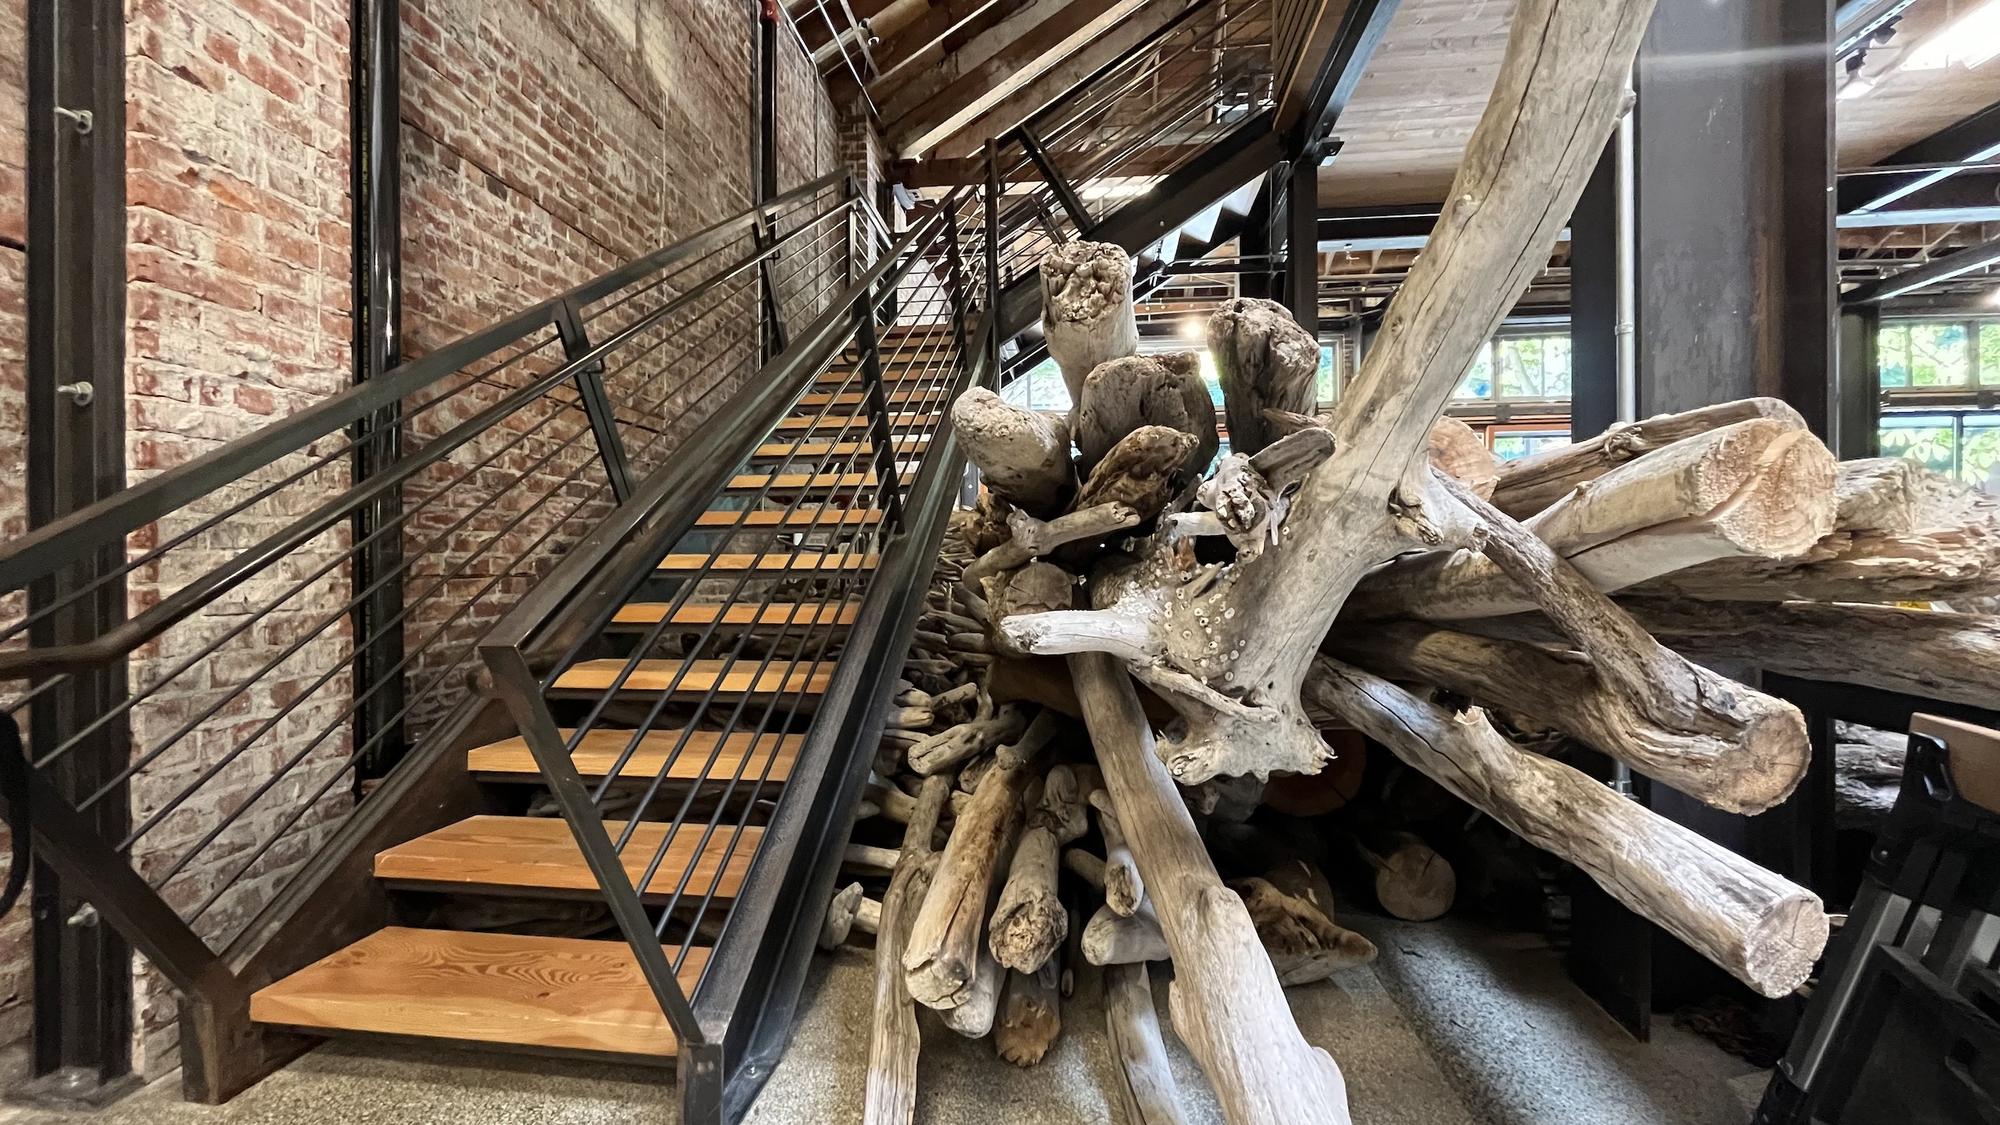  ArtSEA: How 30 logs washed up in a South Lake Union gallery 